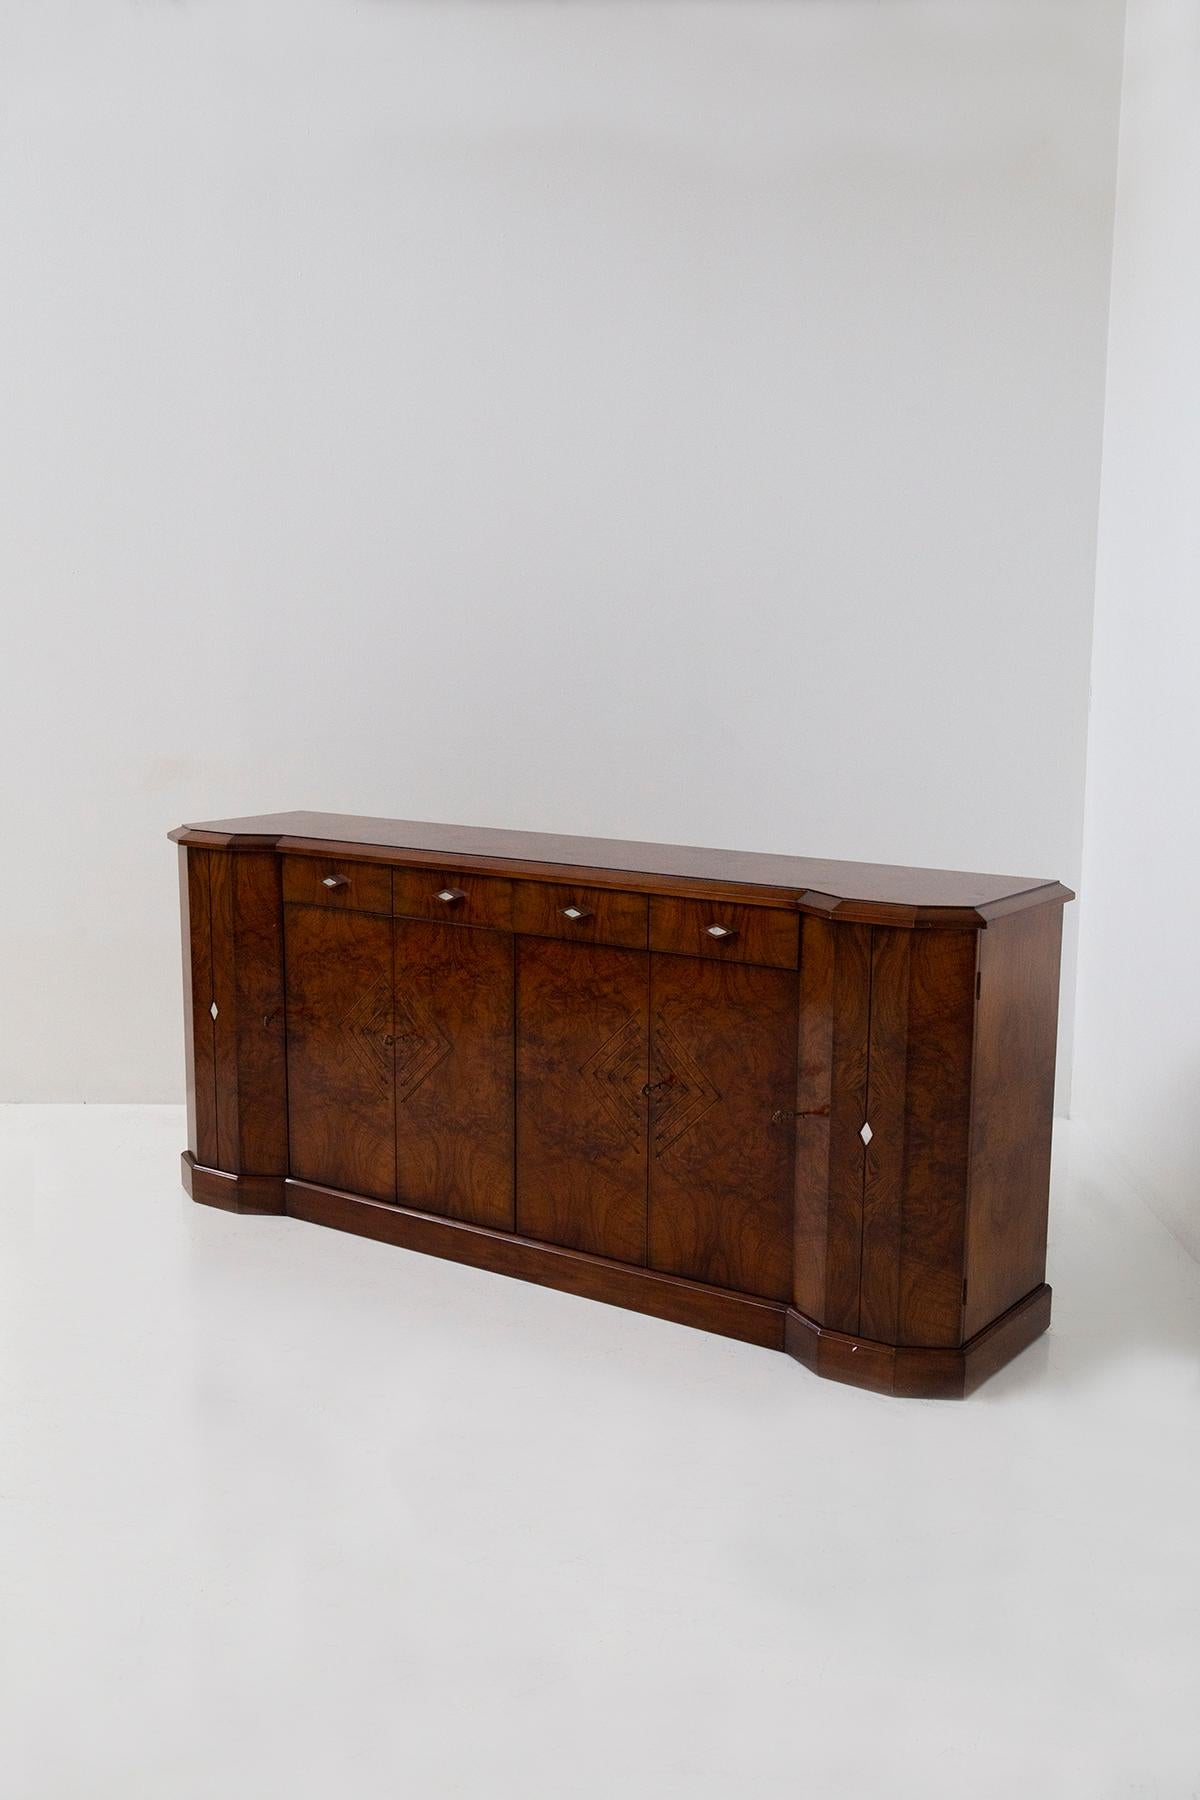 Step back in time to the glamorous era of the 1970s with our exquisite Italian sideboard in the captivating Art Deco style. This magnificent piece is a testament to the unparalleled craftsmanship of Italian artisans, showcasing the timeless beauty